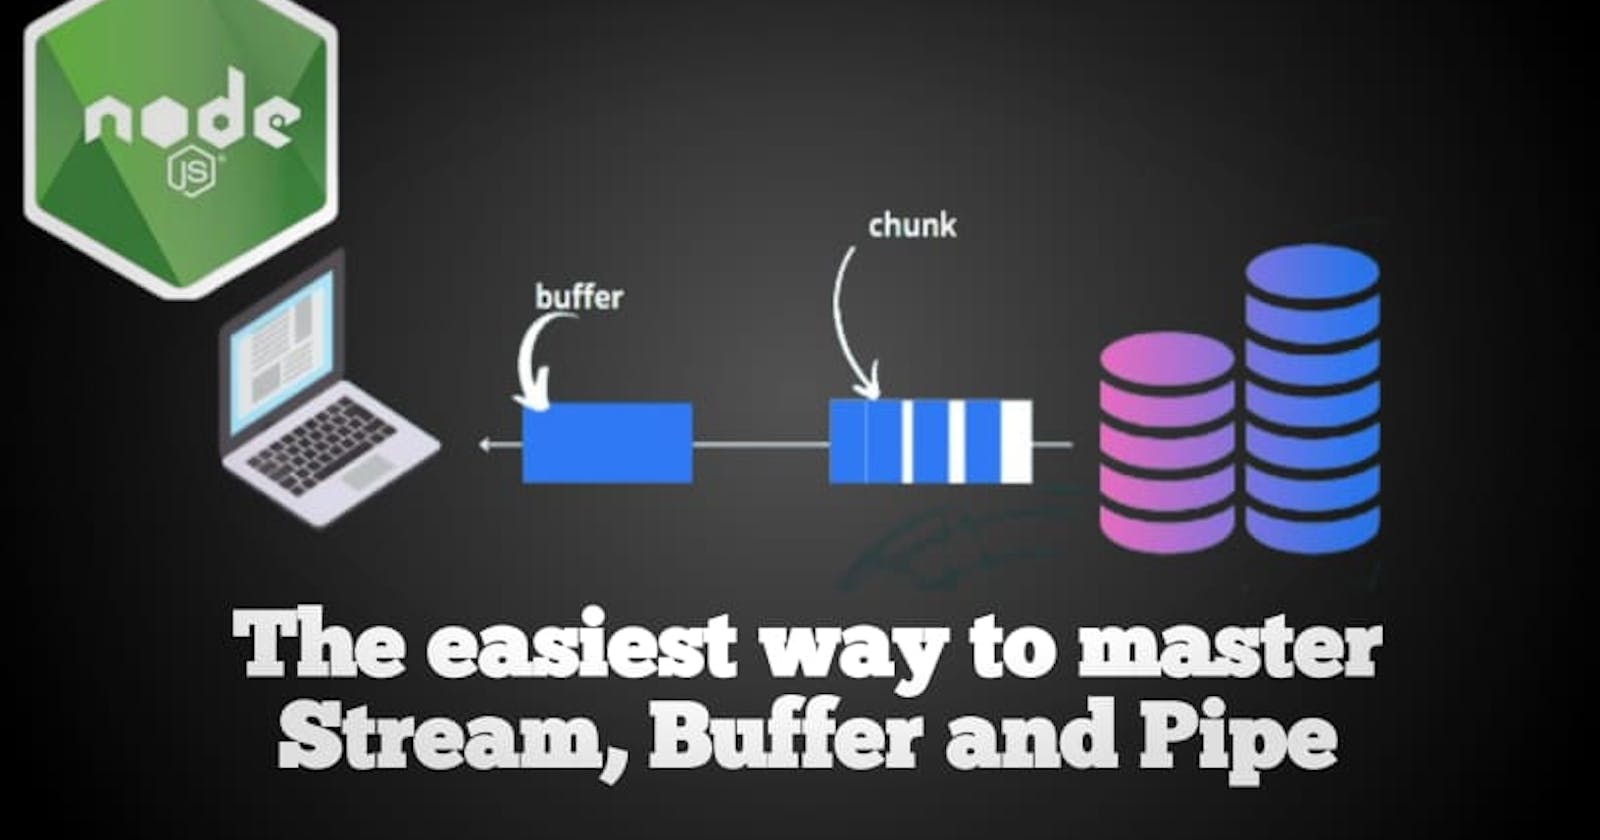 Easiest way to master Stream, Buffer, and Pipe in Nodejs